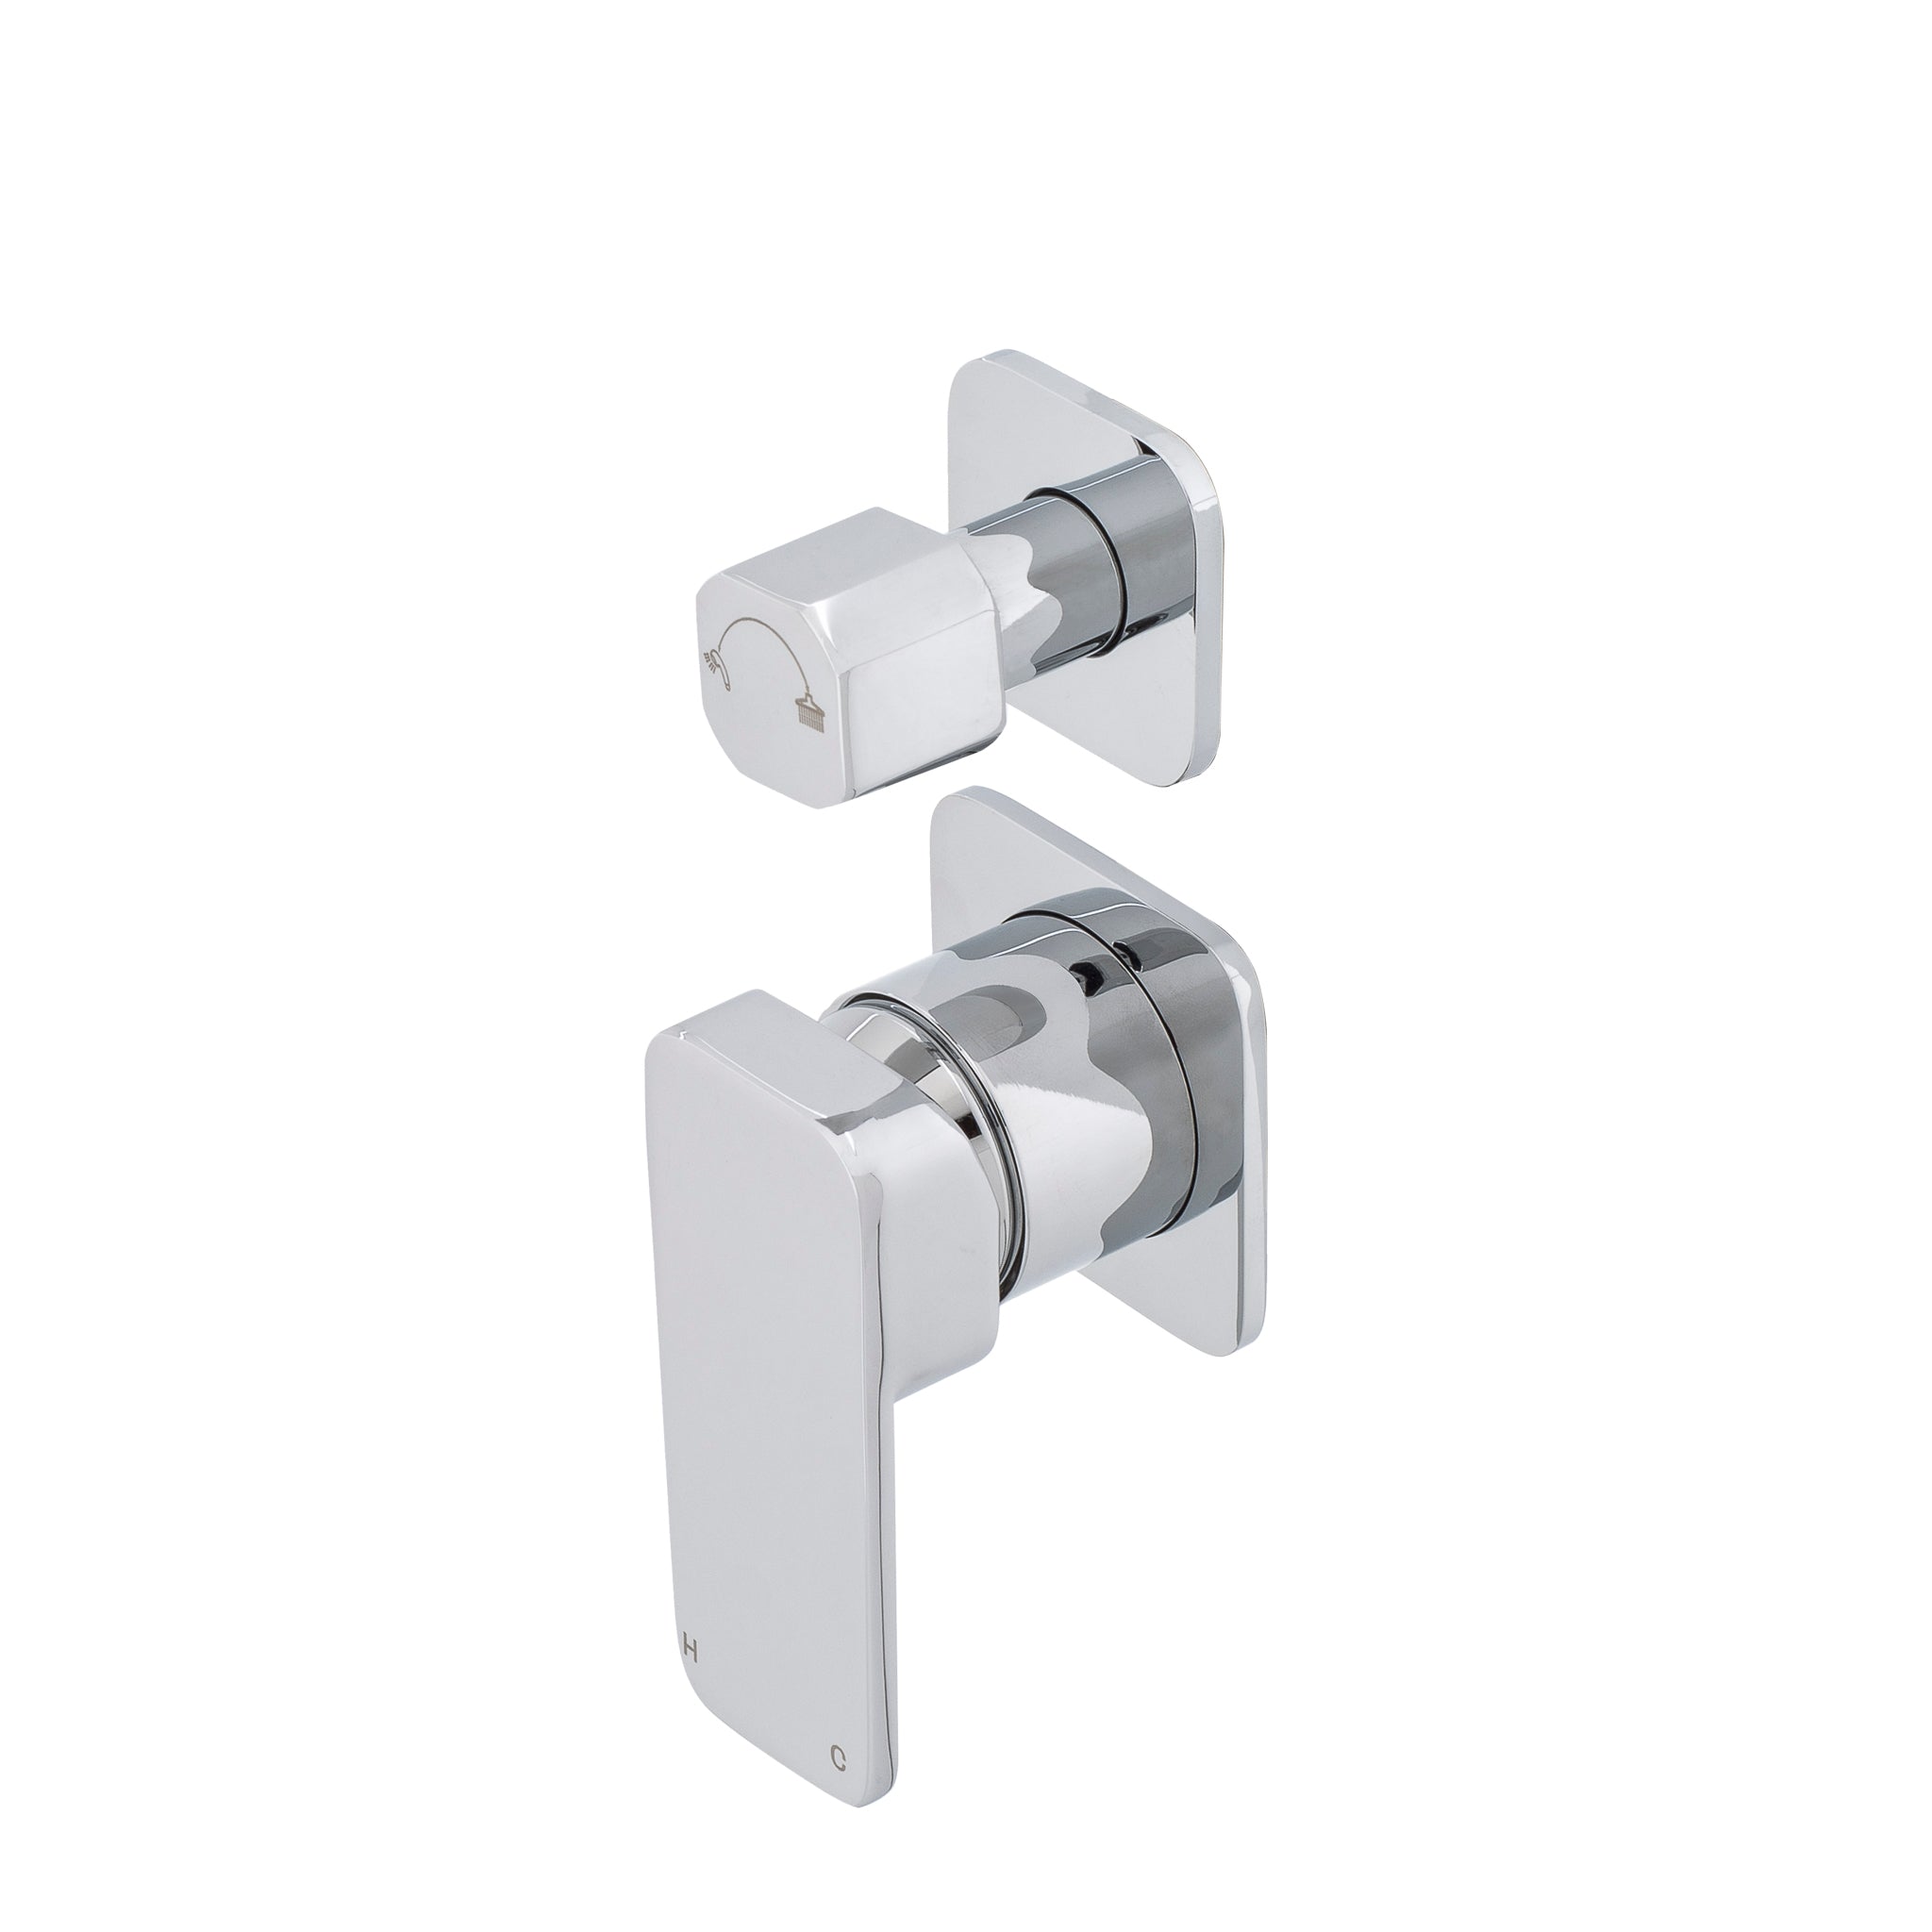 Kiki Shower/ Bath Wall Mixer with Diverter and Square Plates, Polished Chrome